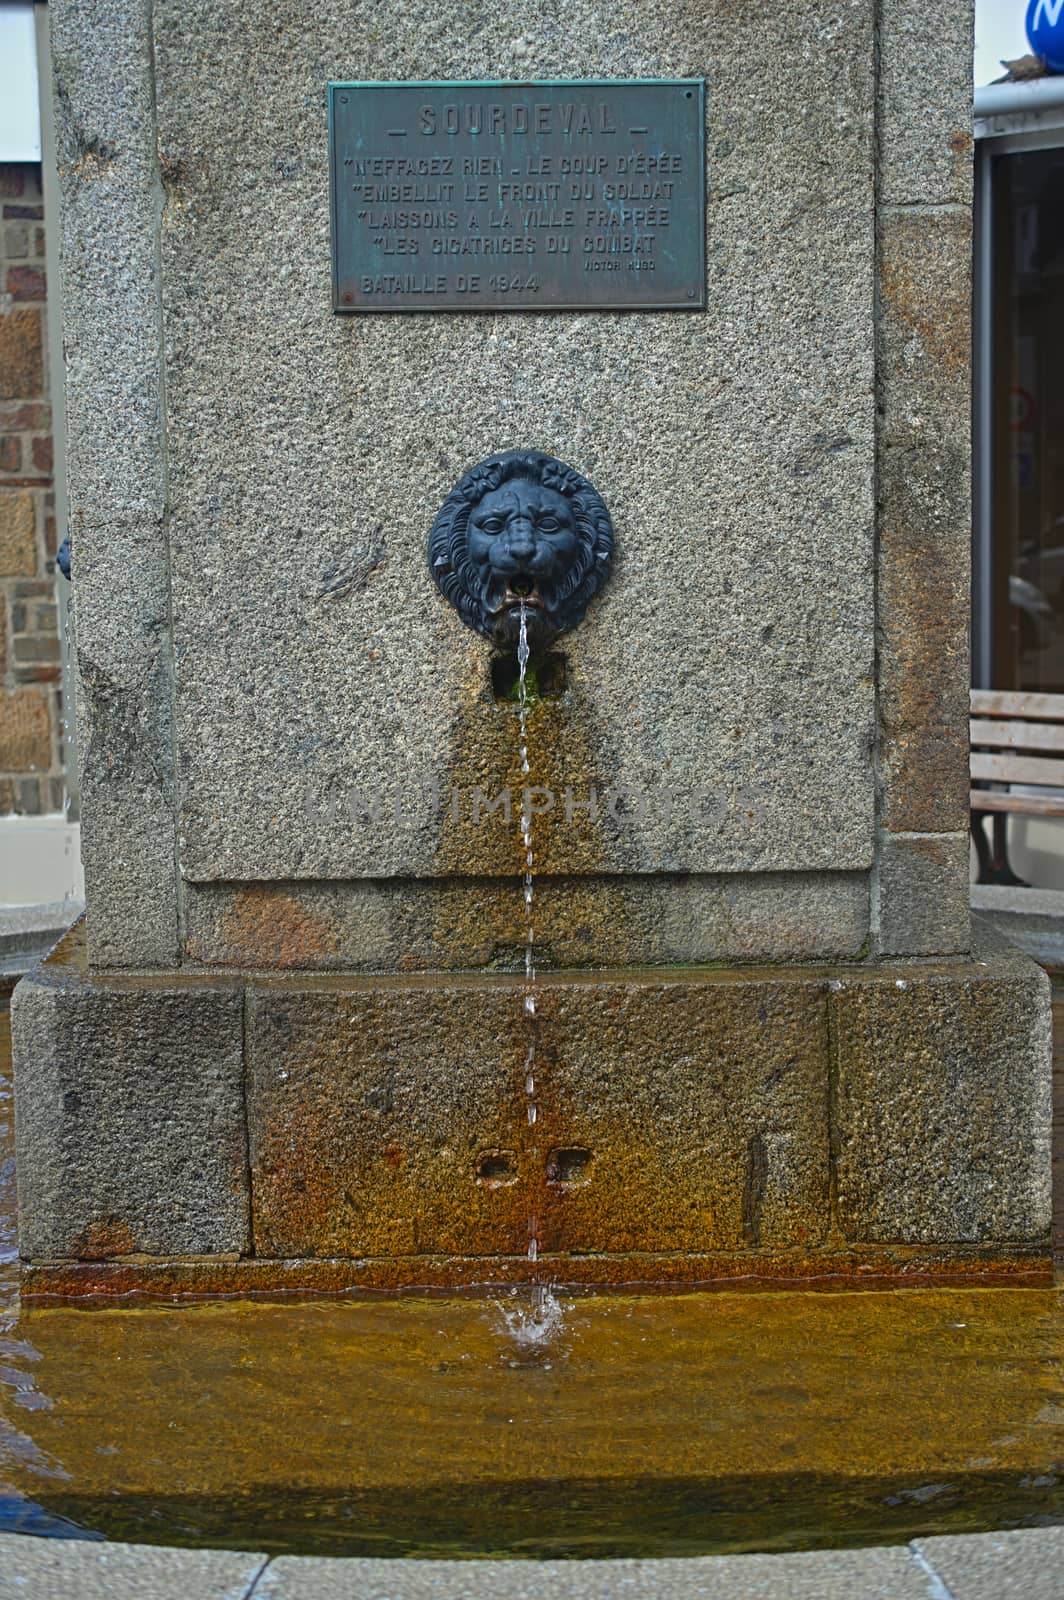 Water dripping from lions head at fountain in Surdeval Normandy France